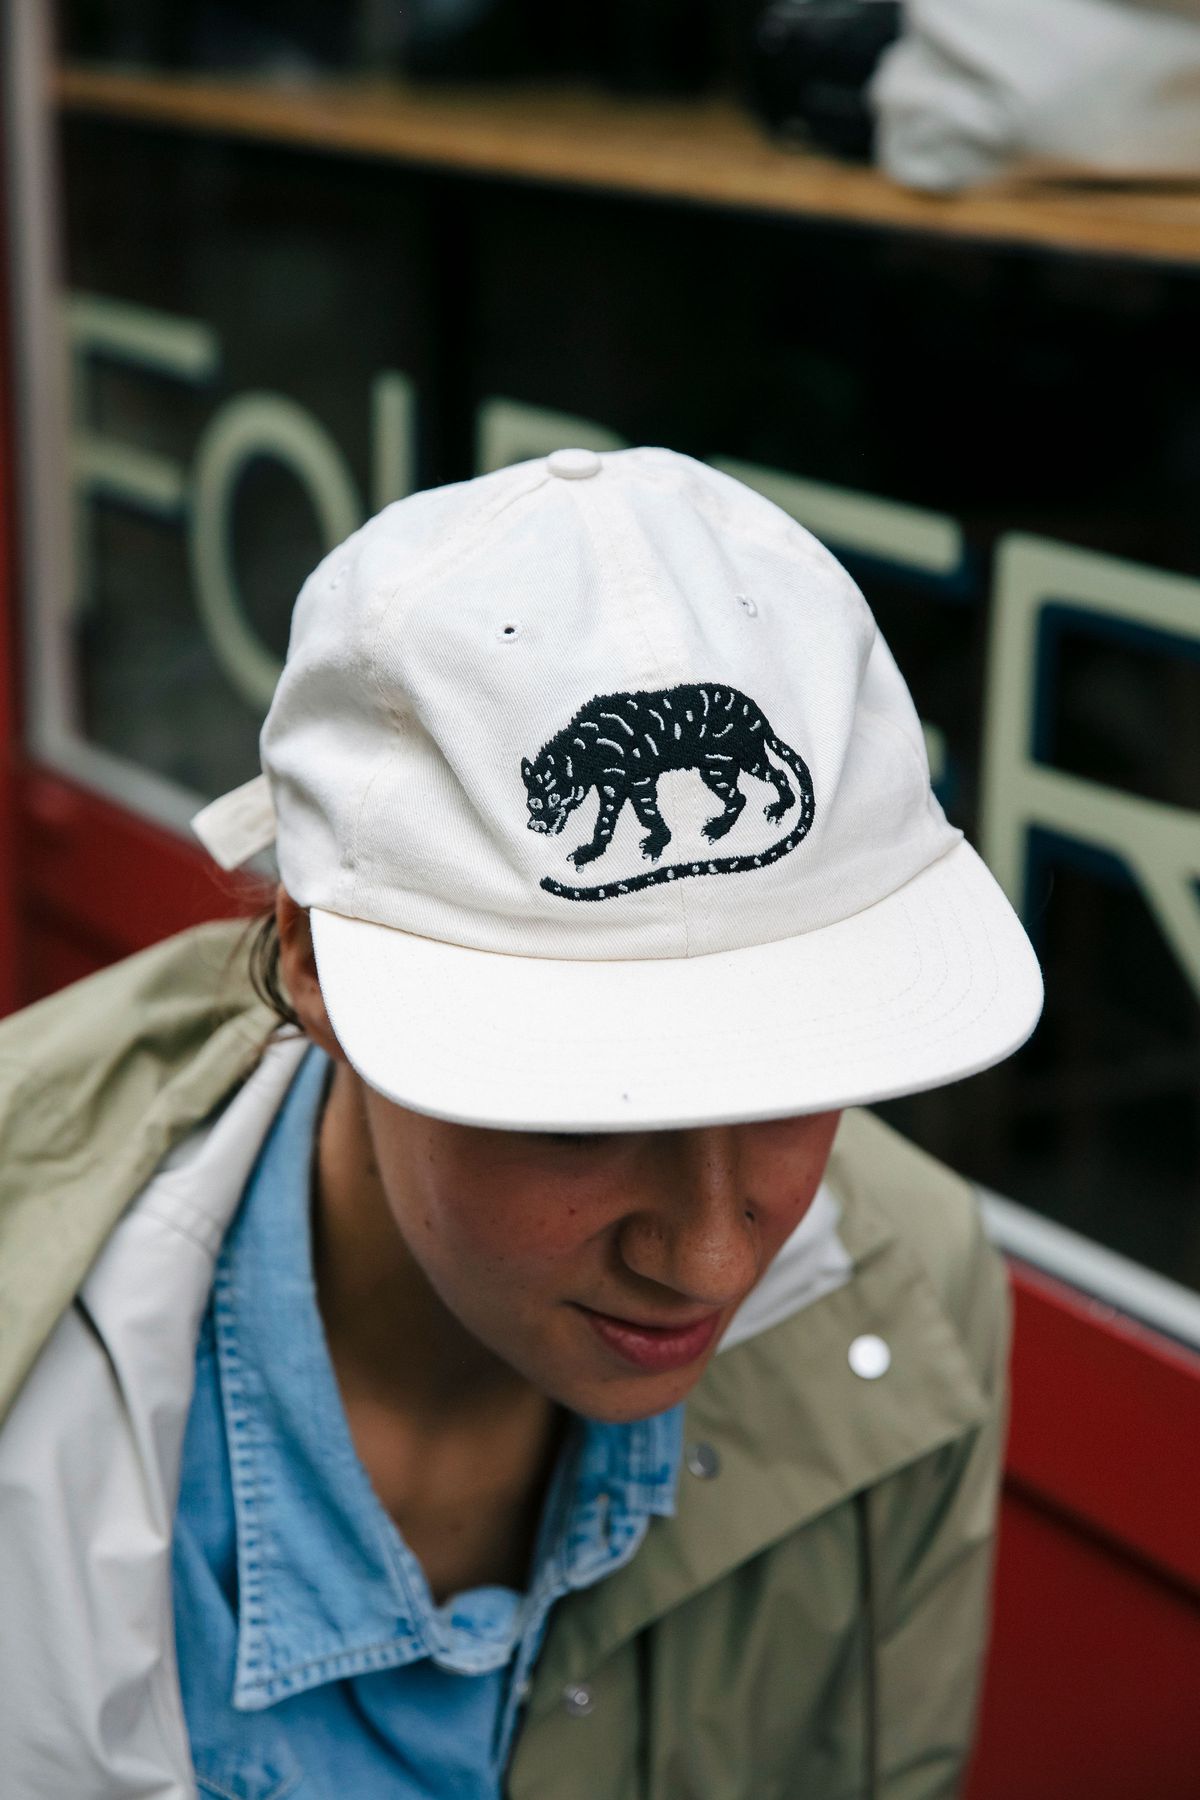 A woman seated shows off her white baseball cap with tiger embroidery.